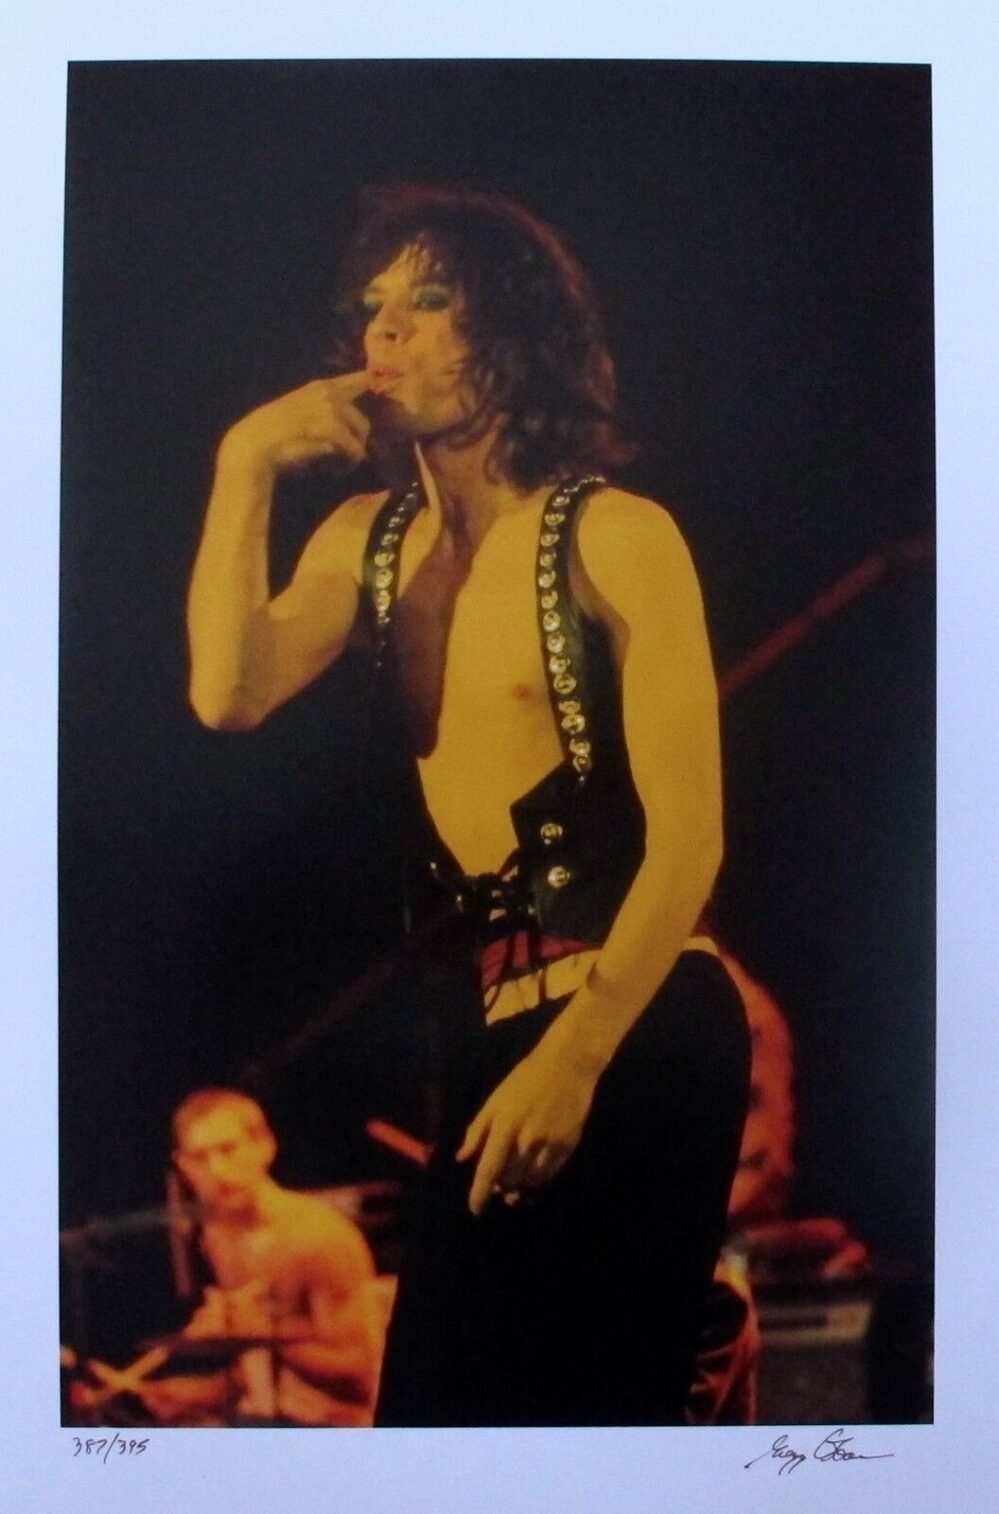 MICK JAGGER Hand Signed Limited Edition Photograph by GREGG COBARR